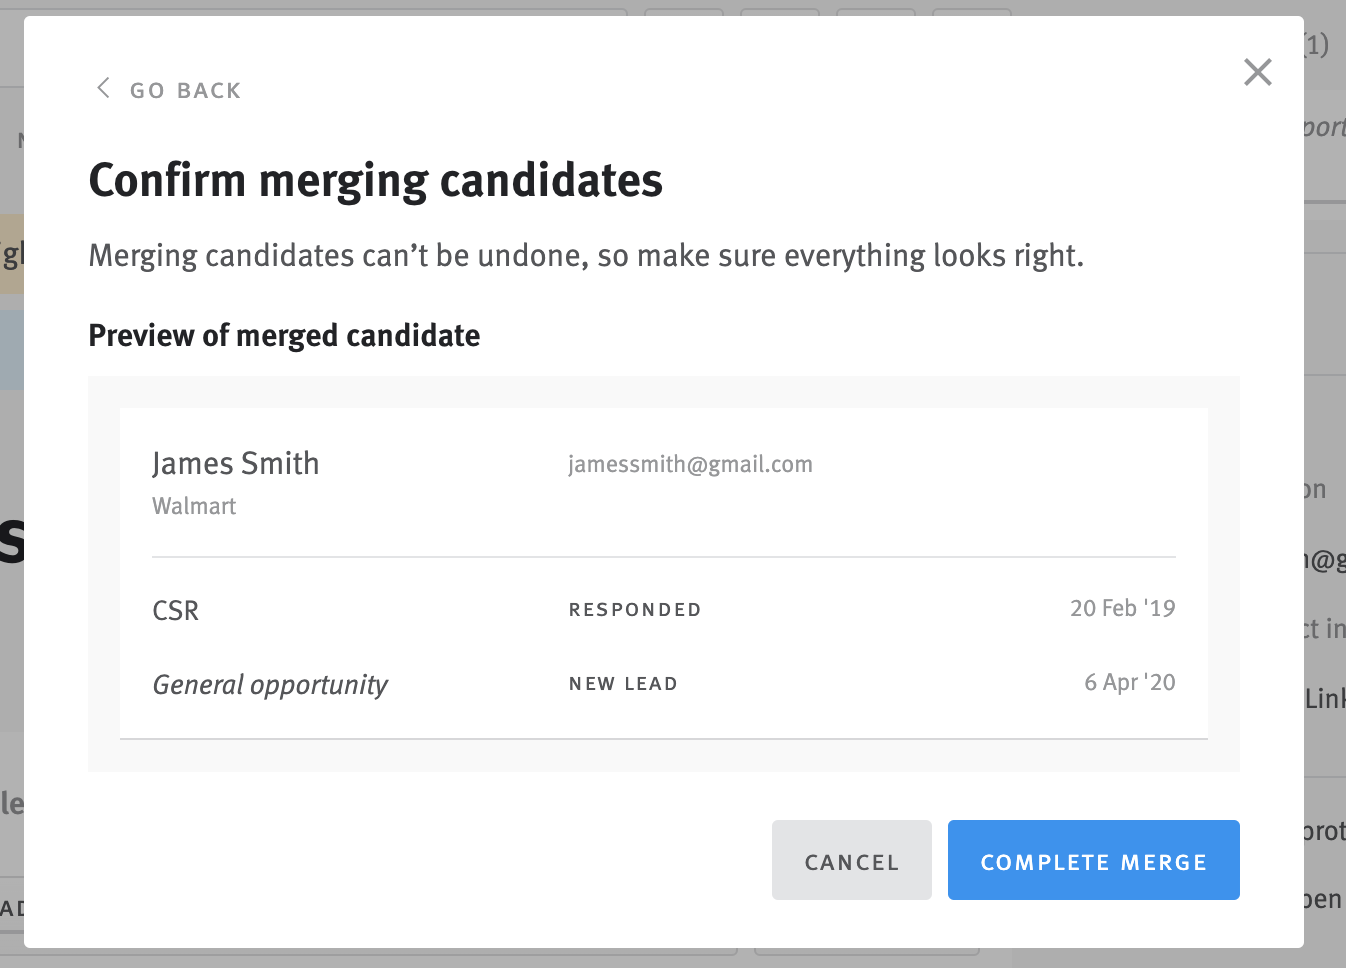 Merge candidate modal showing preview of merged candidate profile.